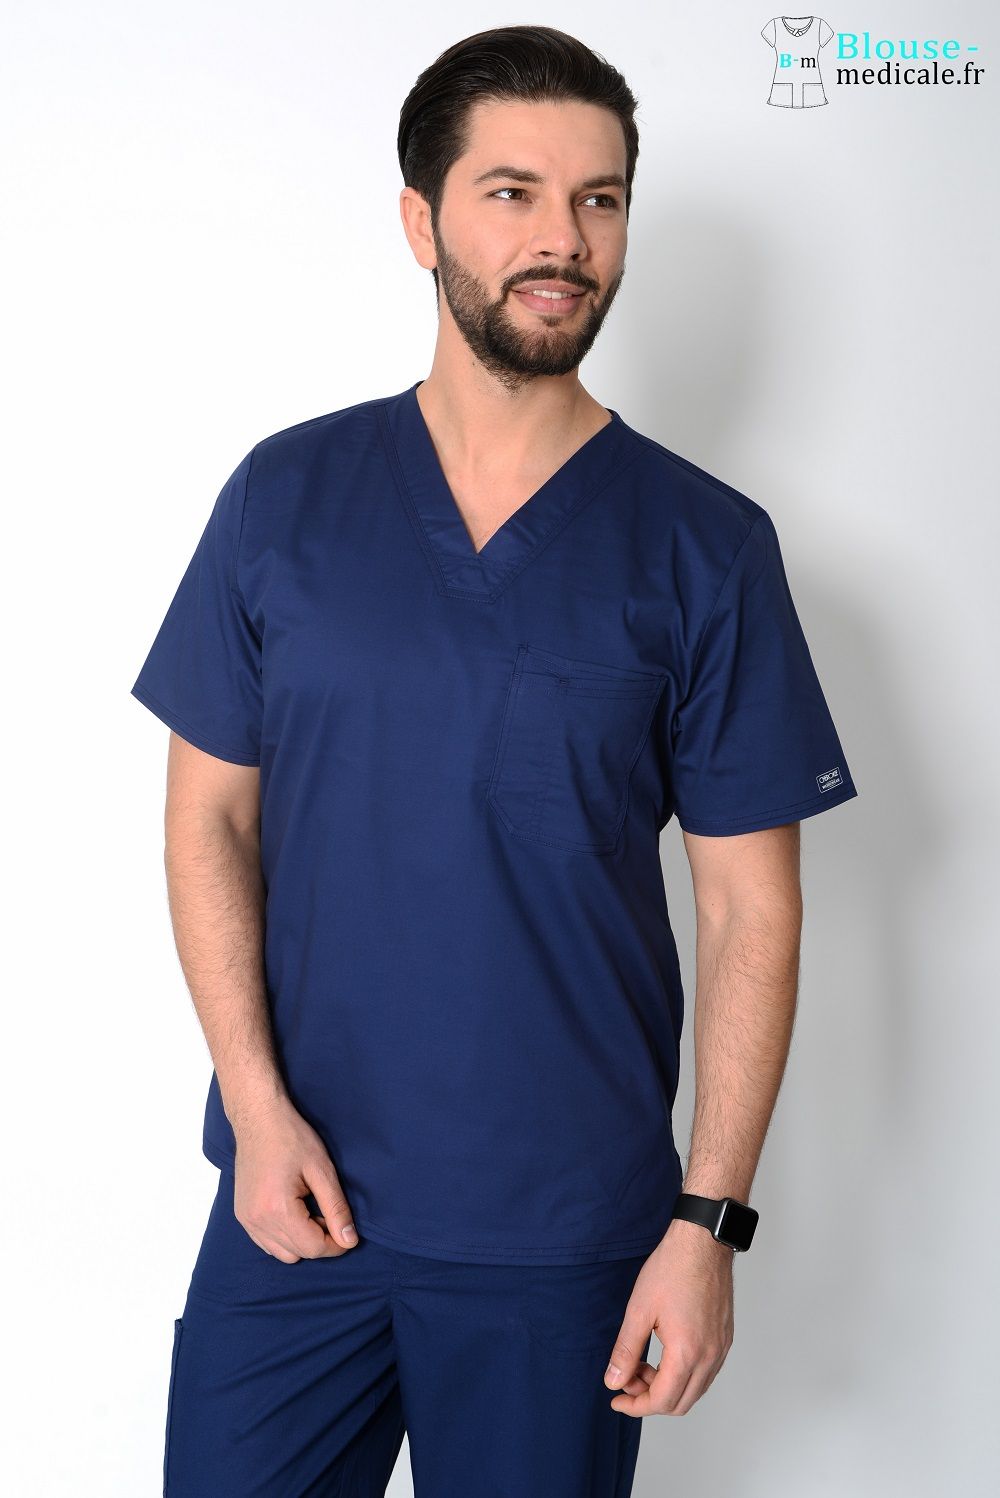 blouse medicale homme couleur cherokee marine